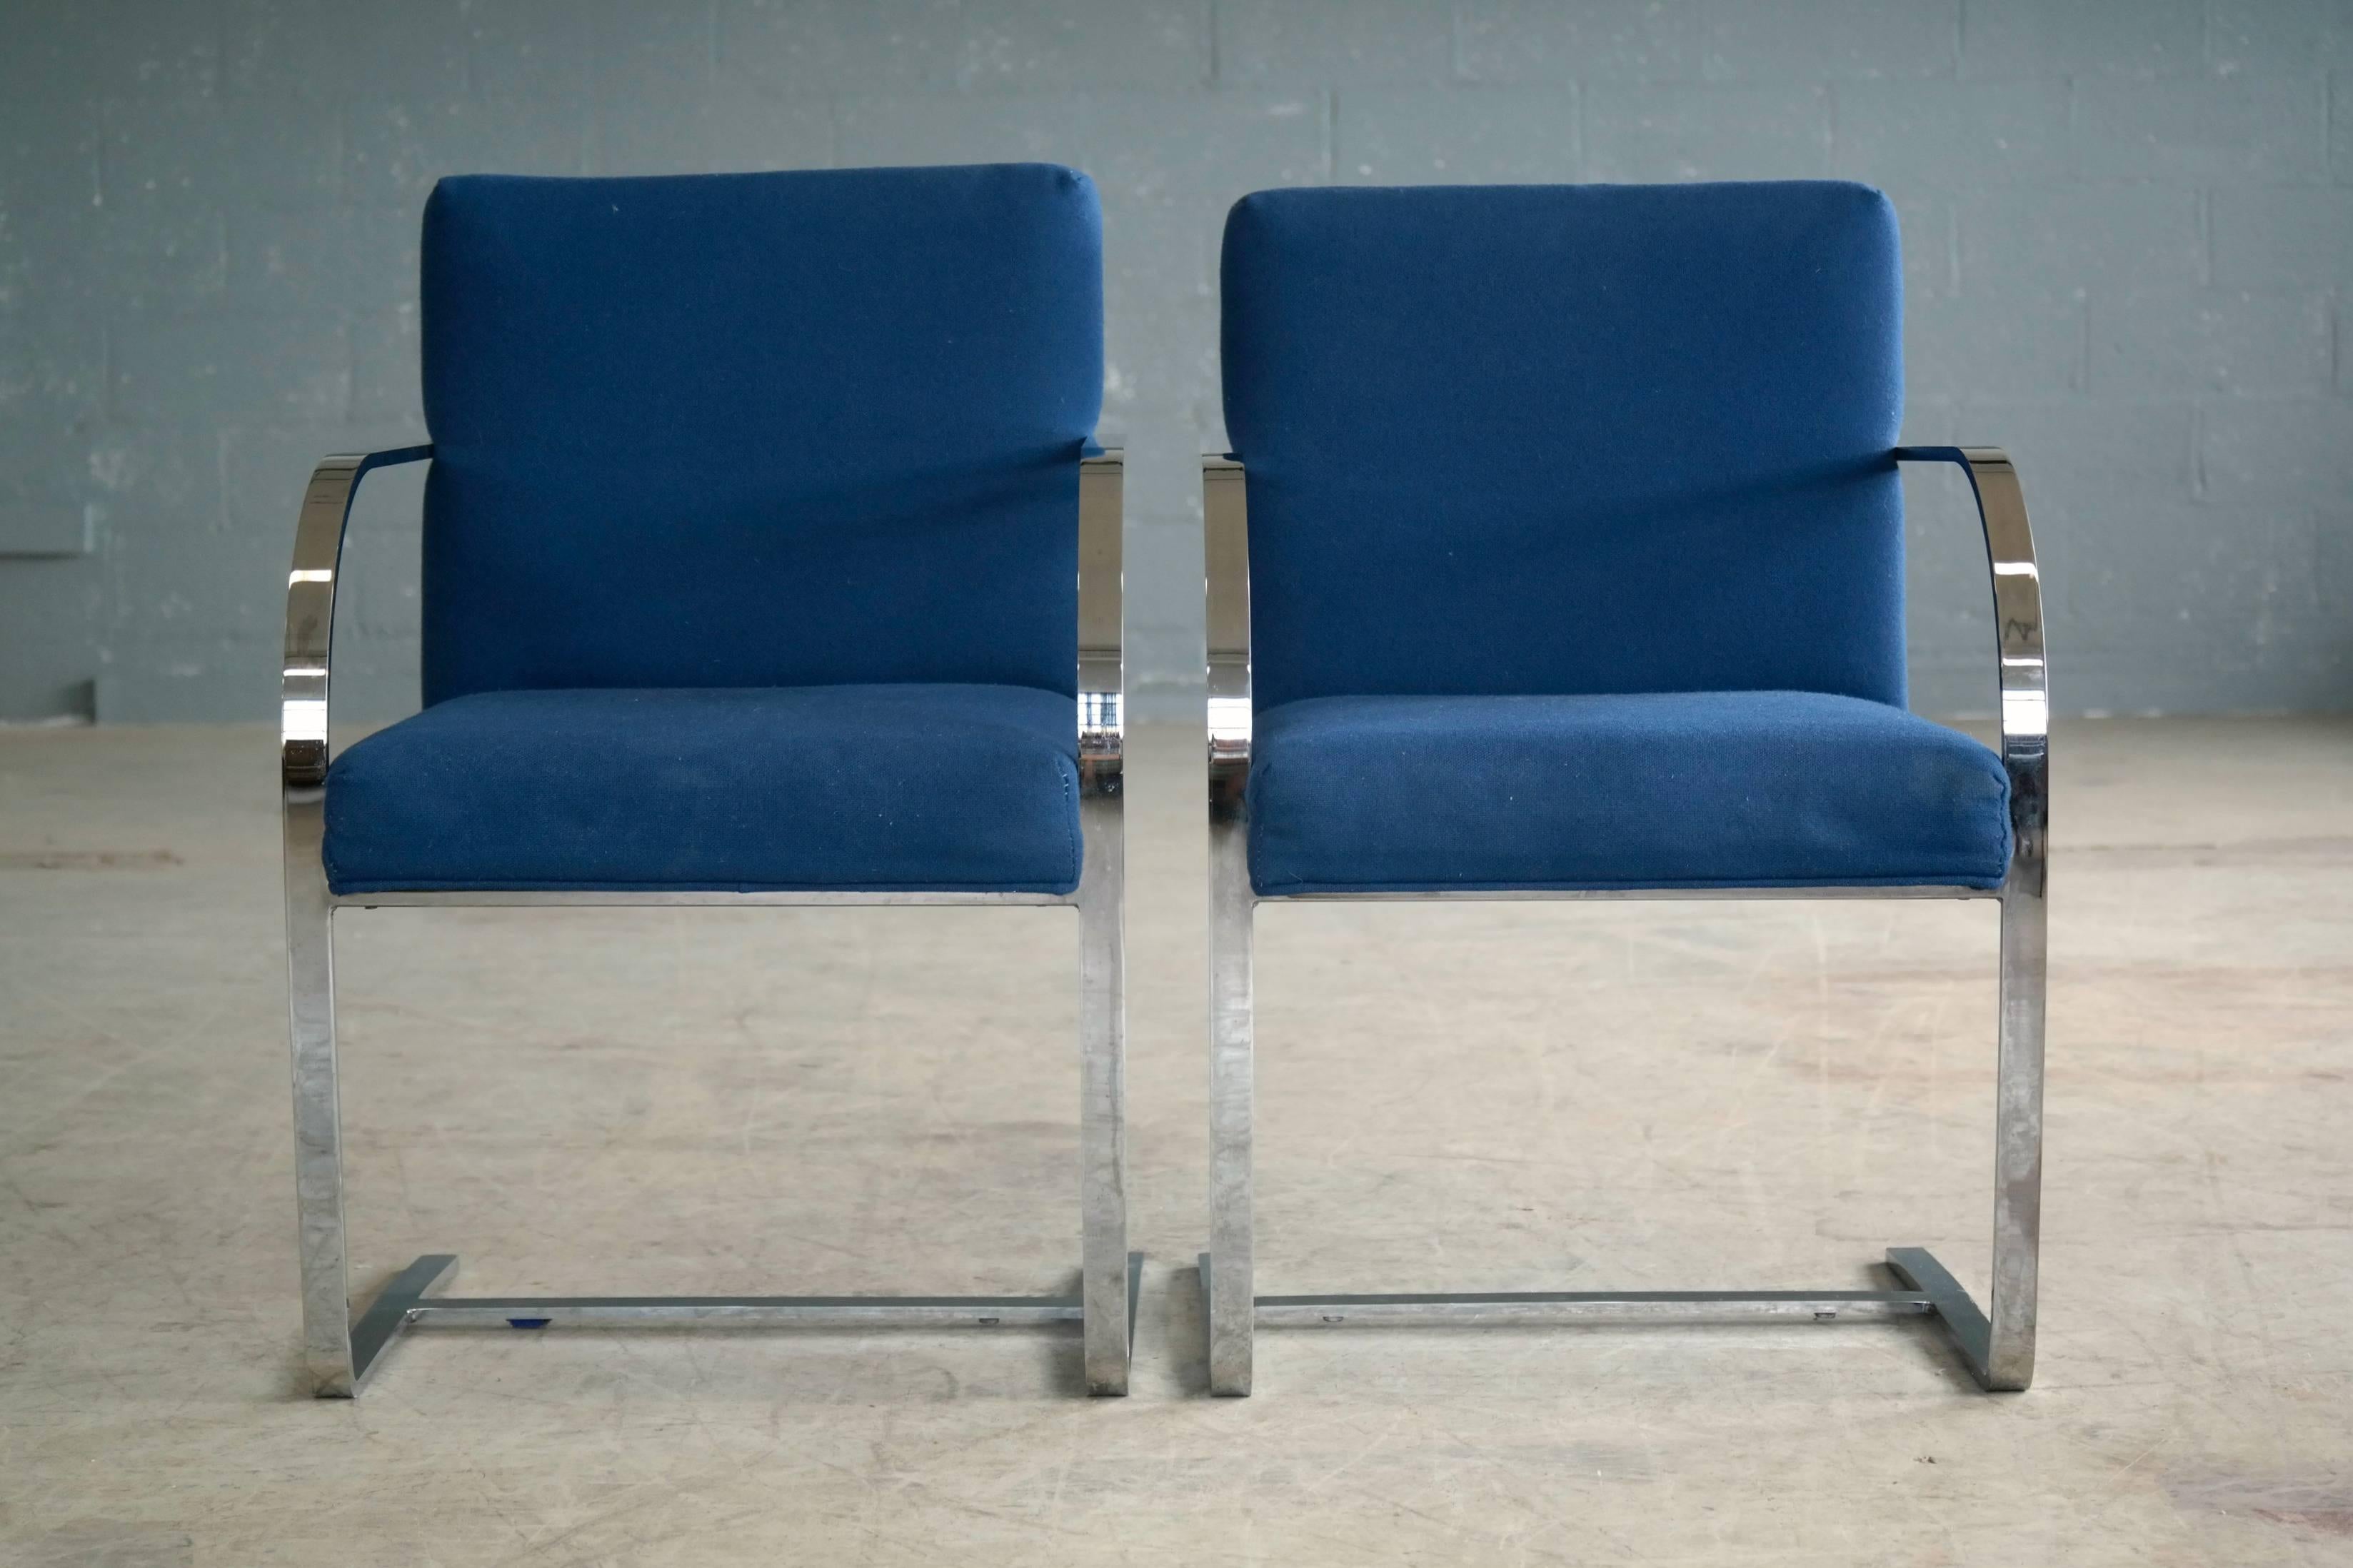 American Pair of Brno Style Side Chairs in the Manner of Mies van der Rohe